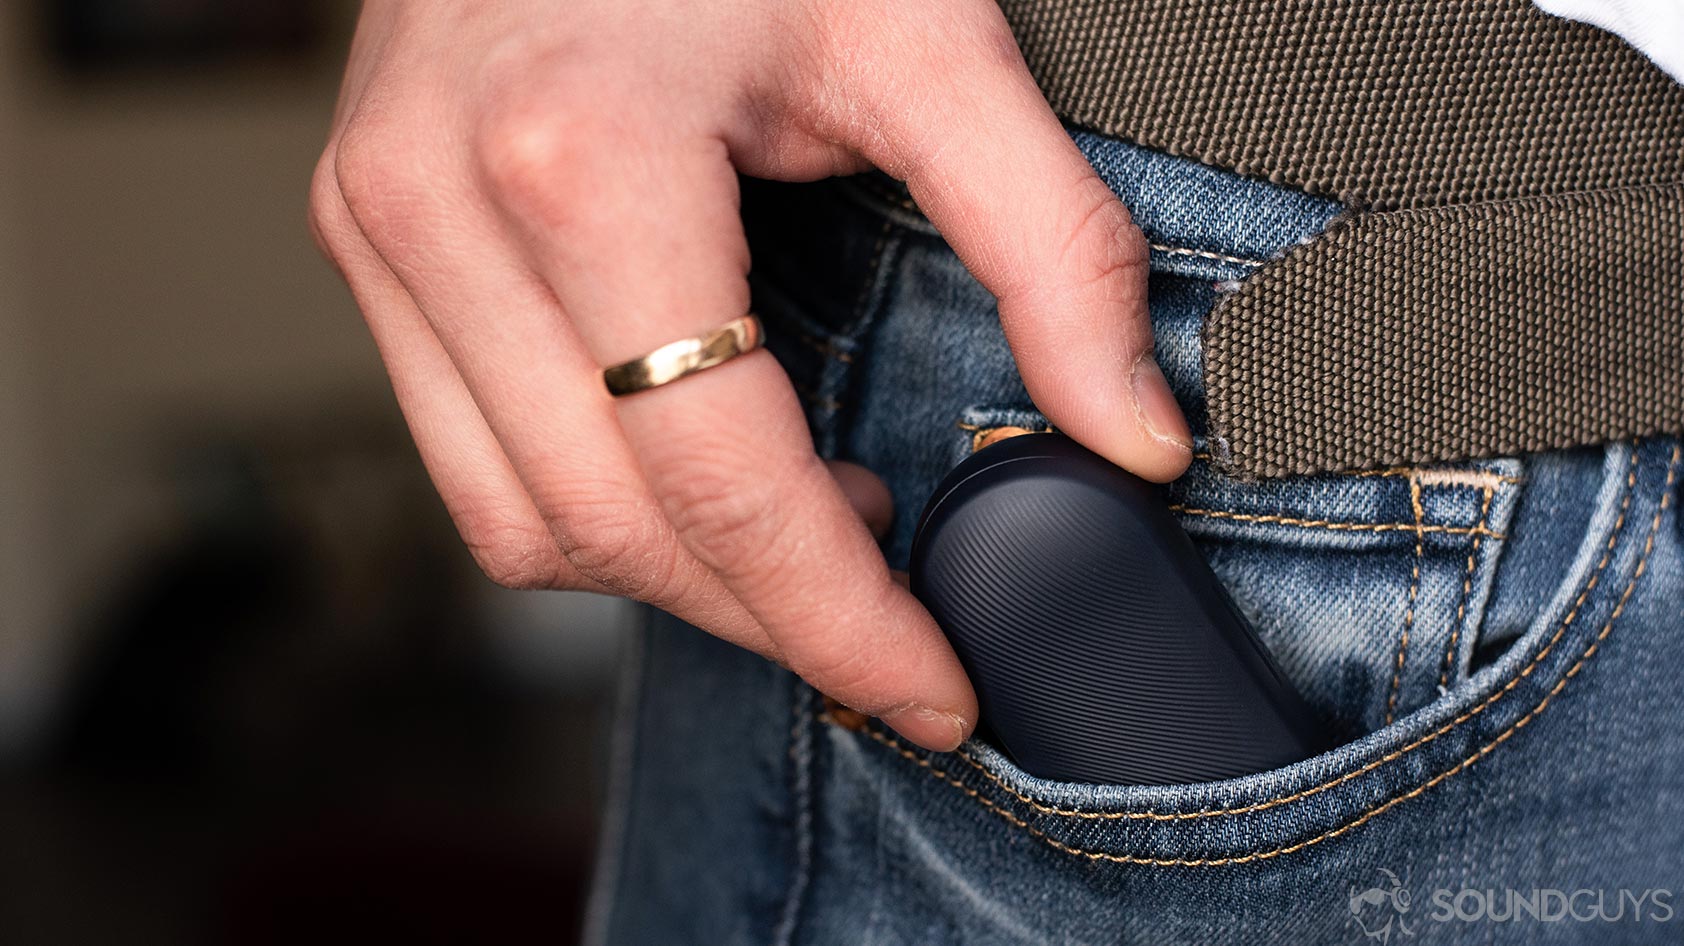 The Mobvoi TicPods 2 Pro true wireless earbuds charging case being removed from a pocket.